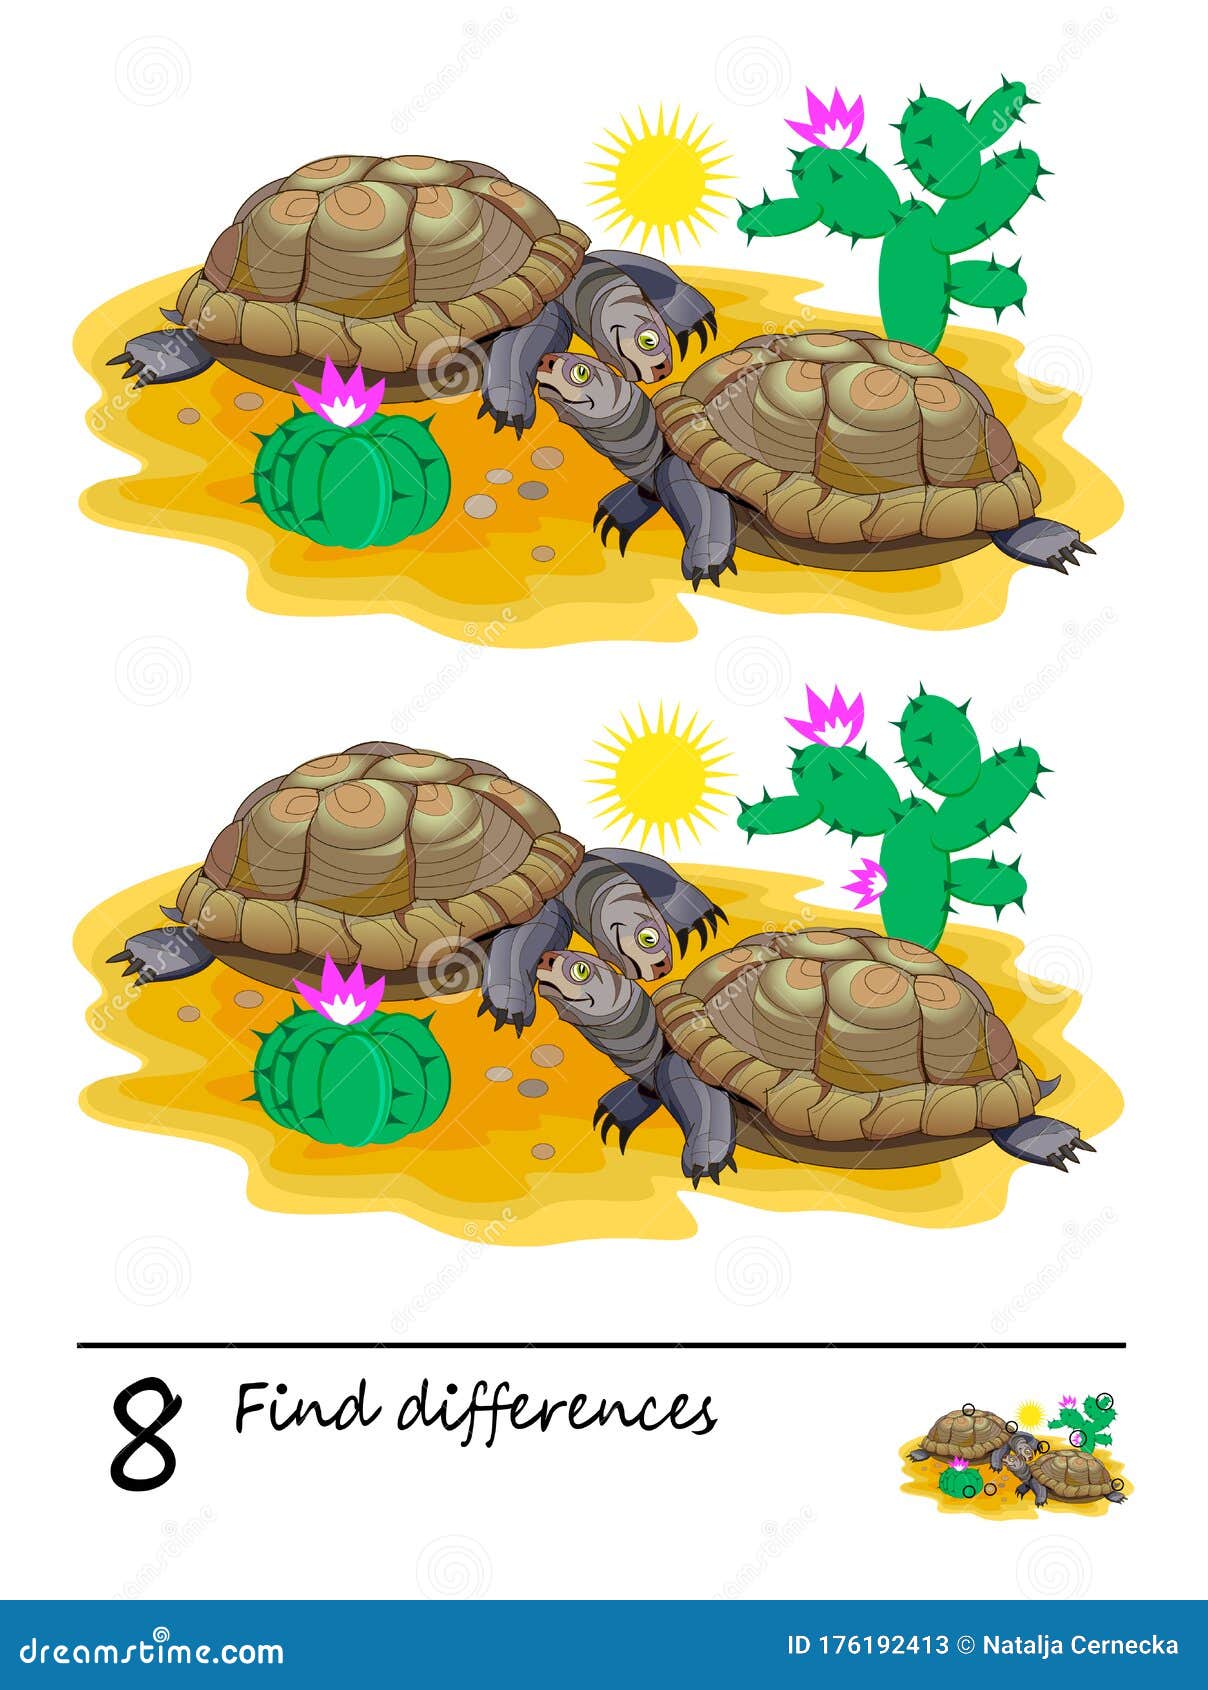 find 8 differences. logic puzzle game for children and adults. printable page for kids brain teaser book.